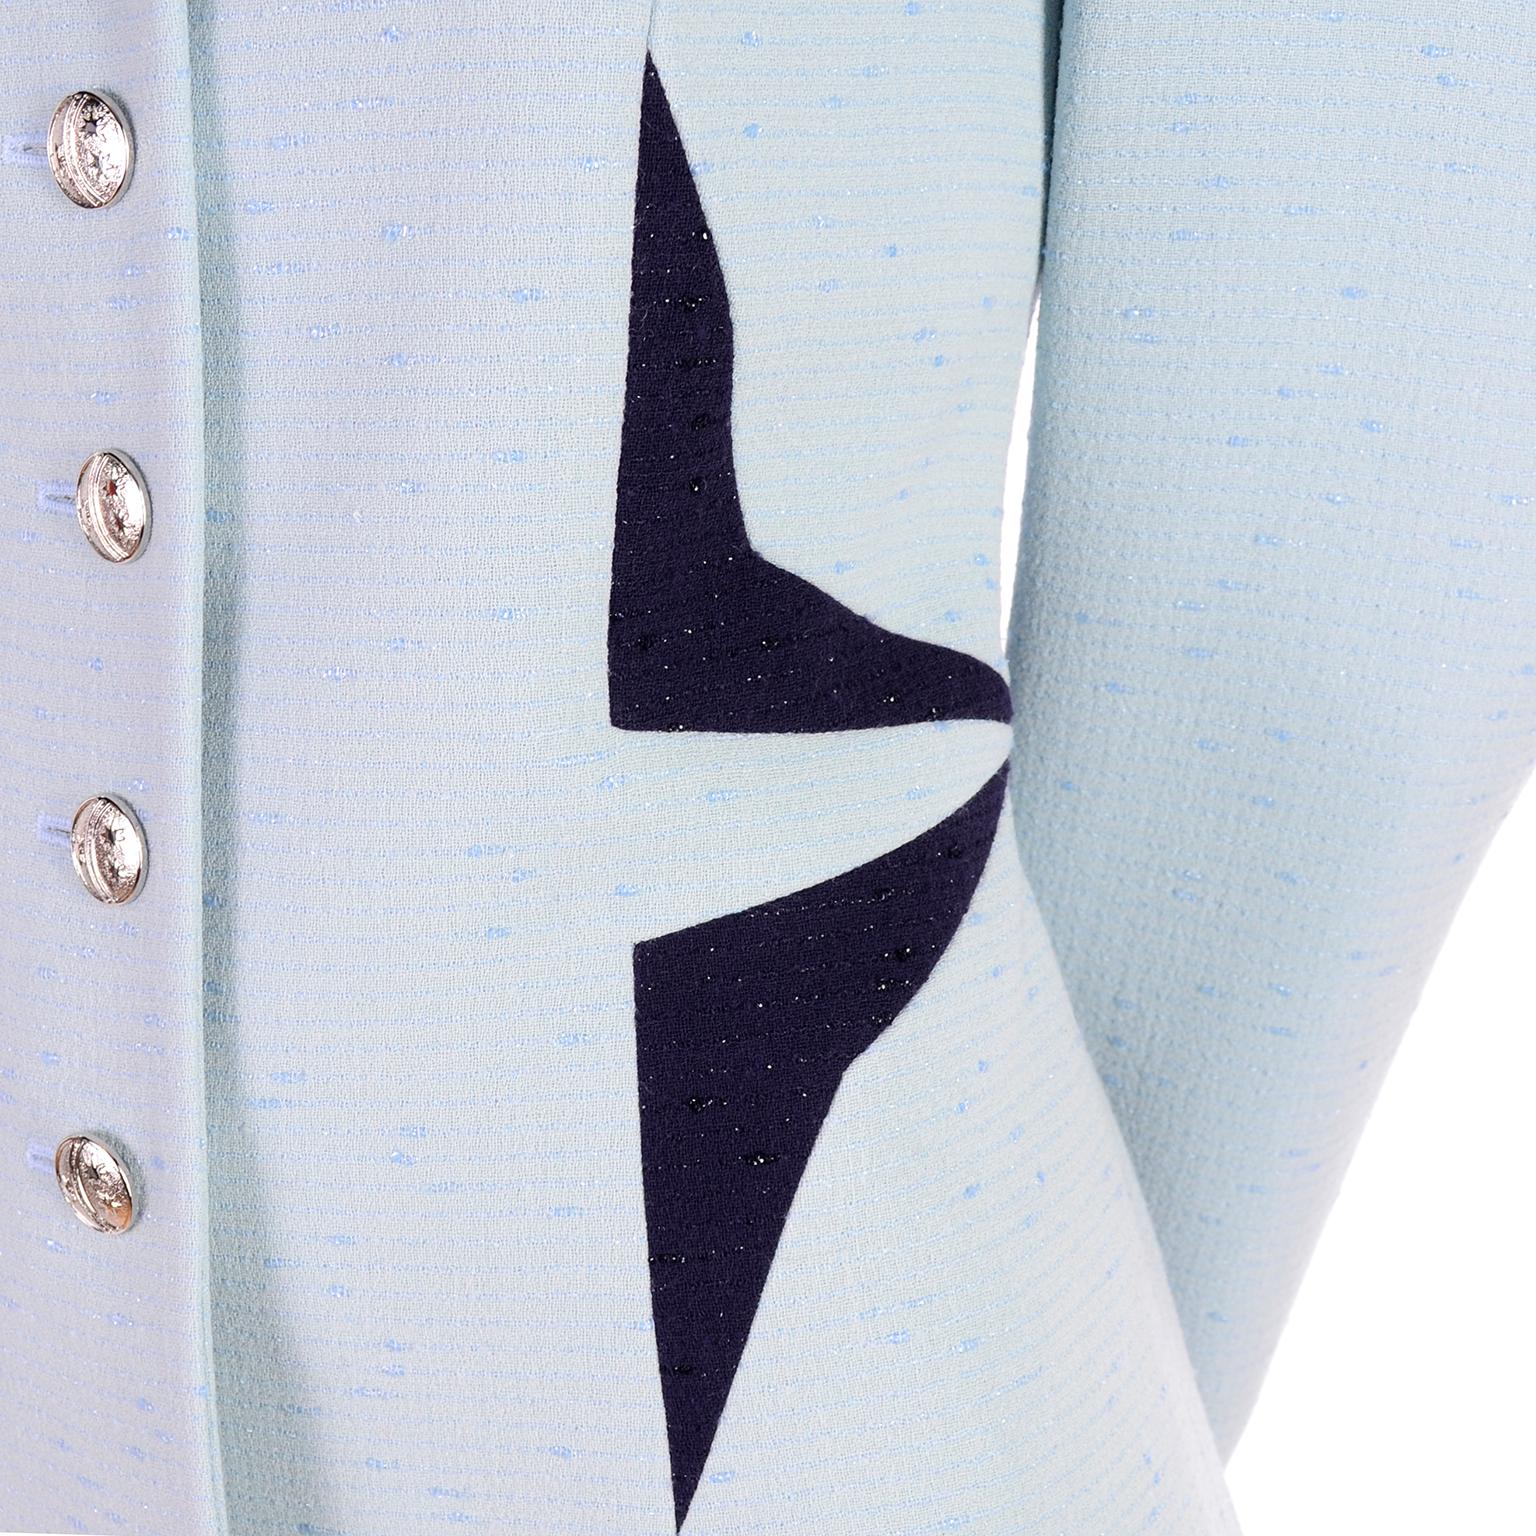 This is a rare Escada vintage blazer with geometric designs reminiscent of Thierry Mugler's style! This pale blue jacket has dramatic dark blue triangles at the waist and under the collar. The jacket is in a virgin wool blue fabric with nylon